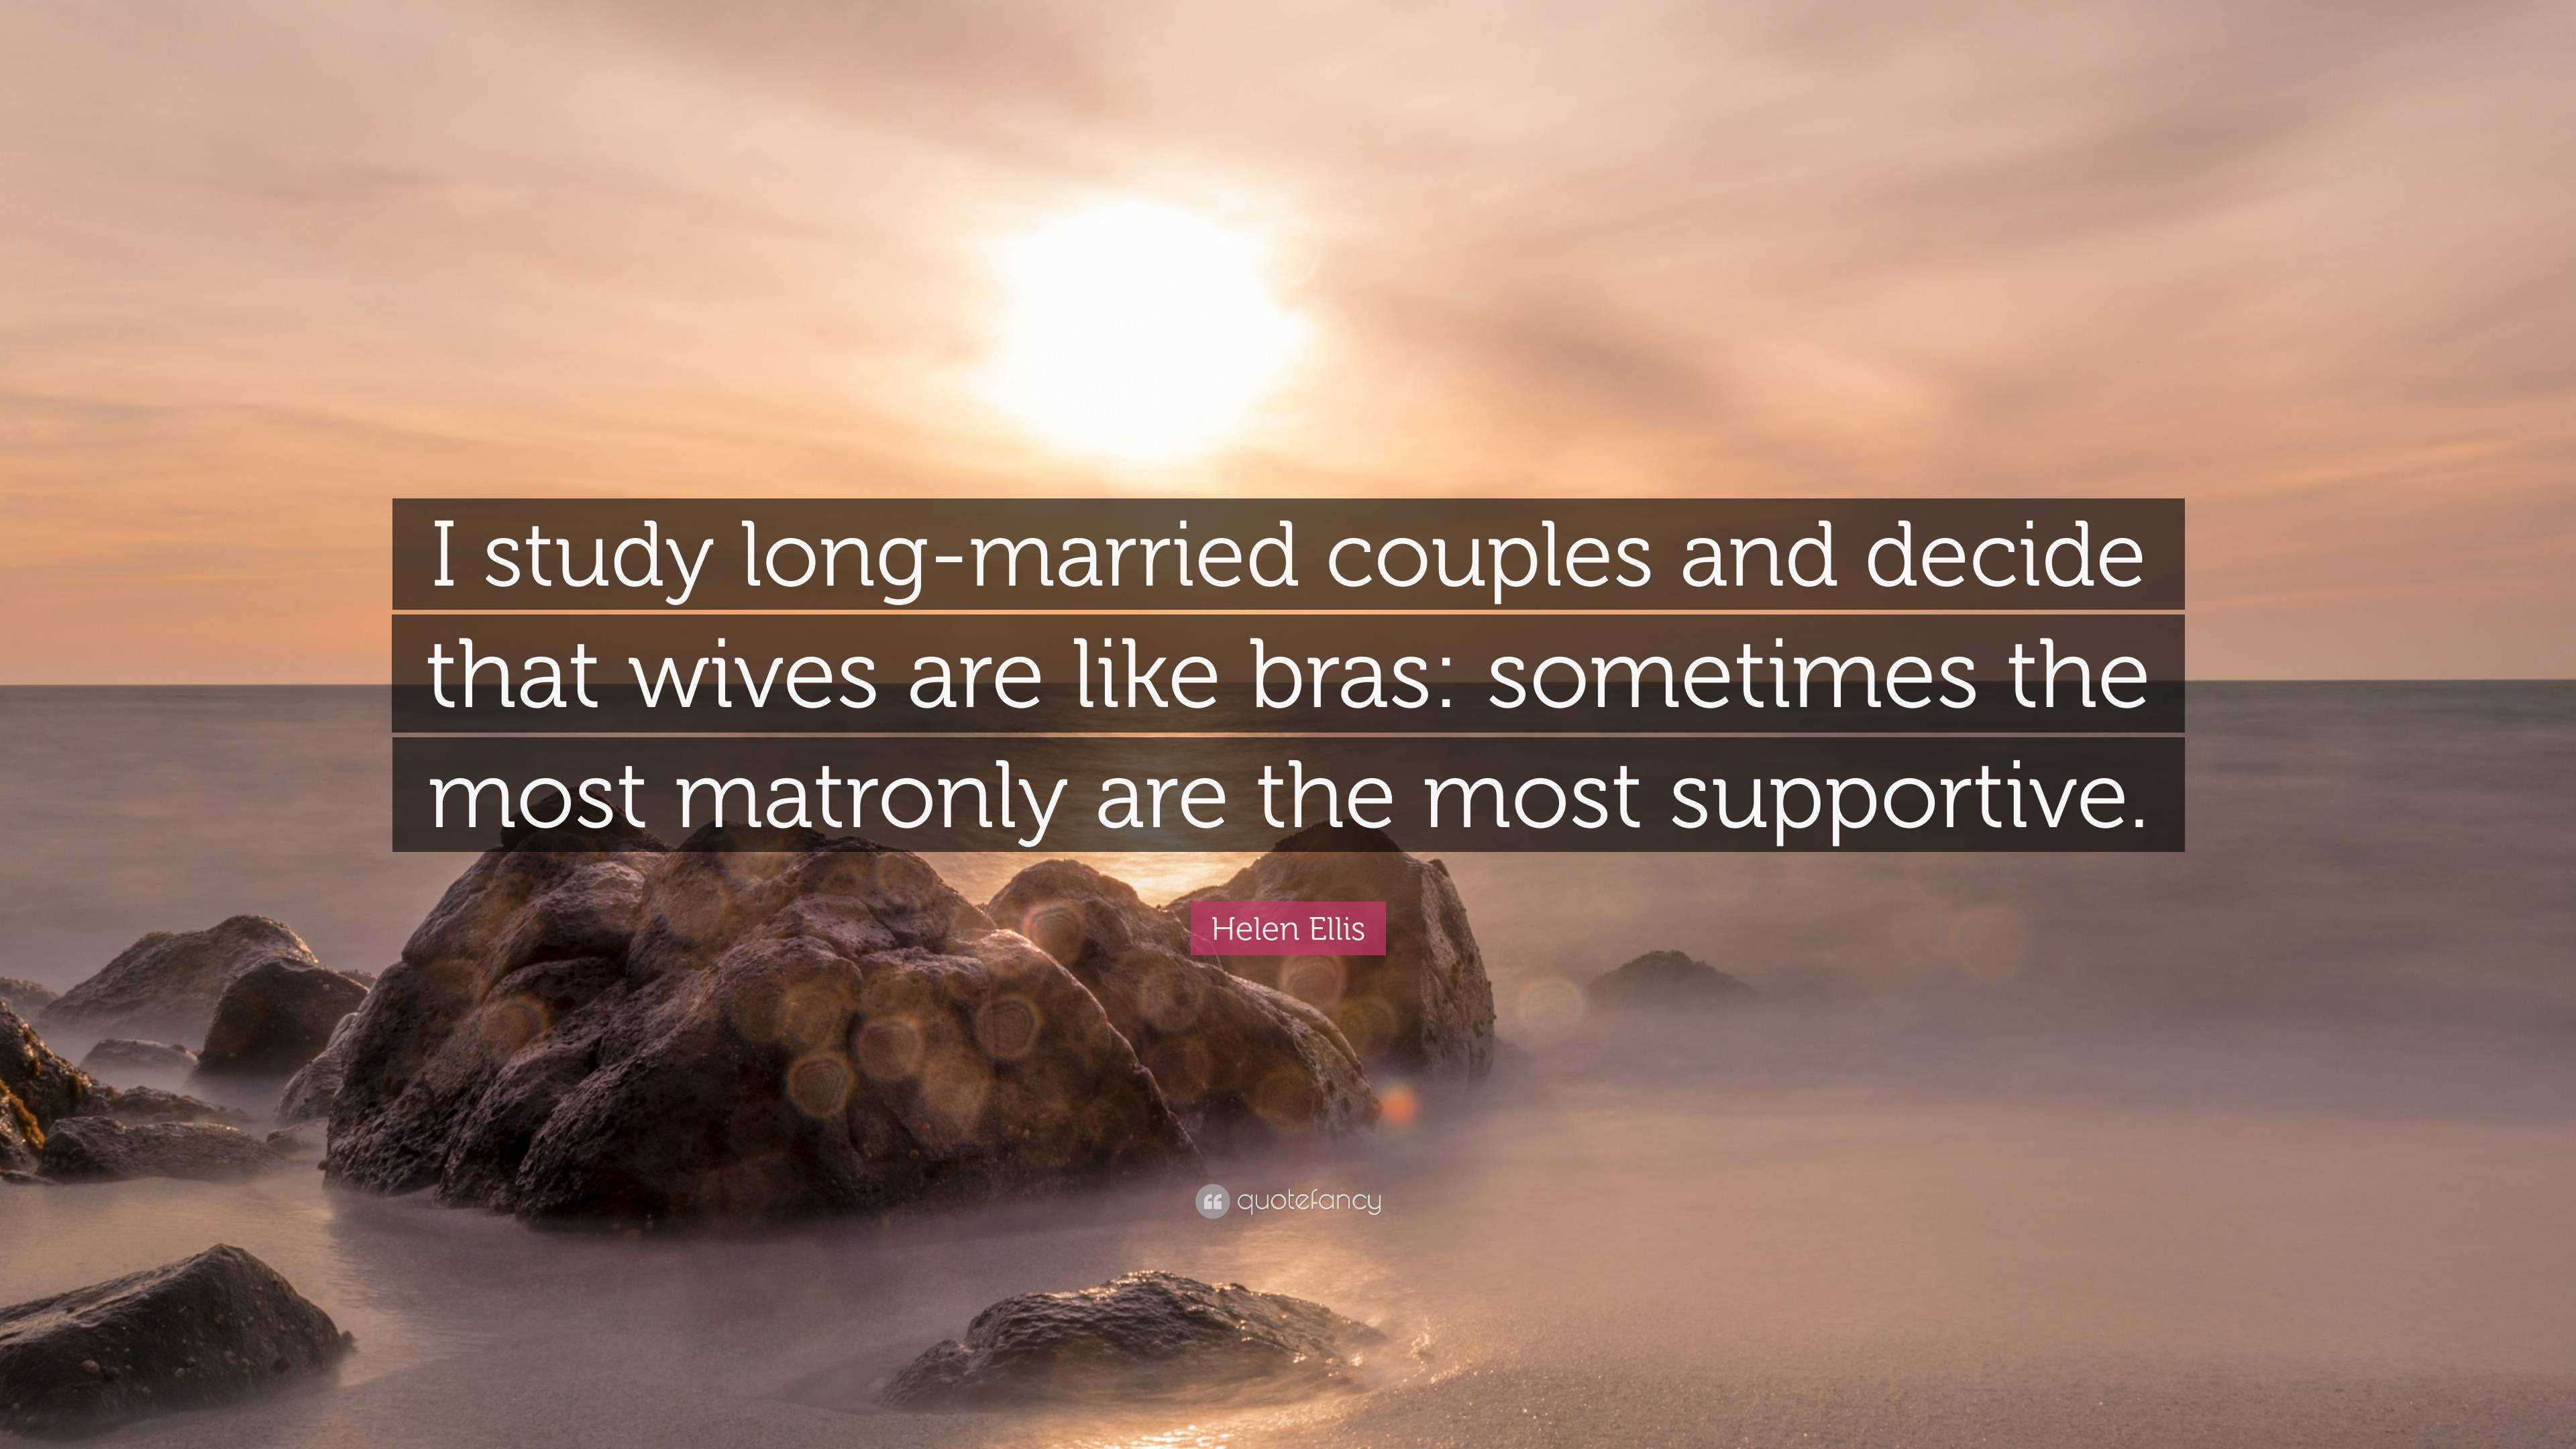 Helen Ellis Quote: “I study long-married couples and decide that